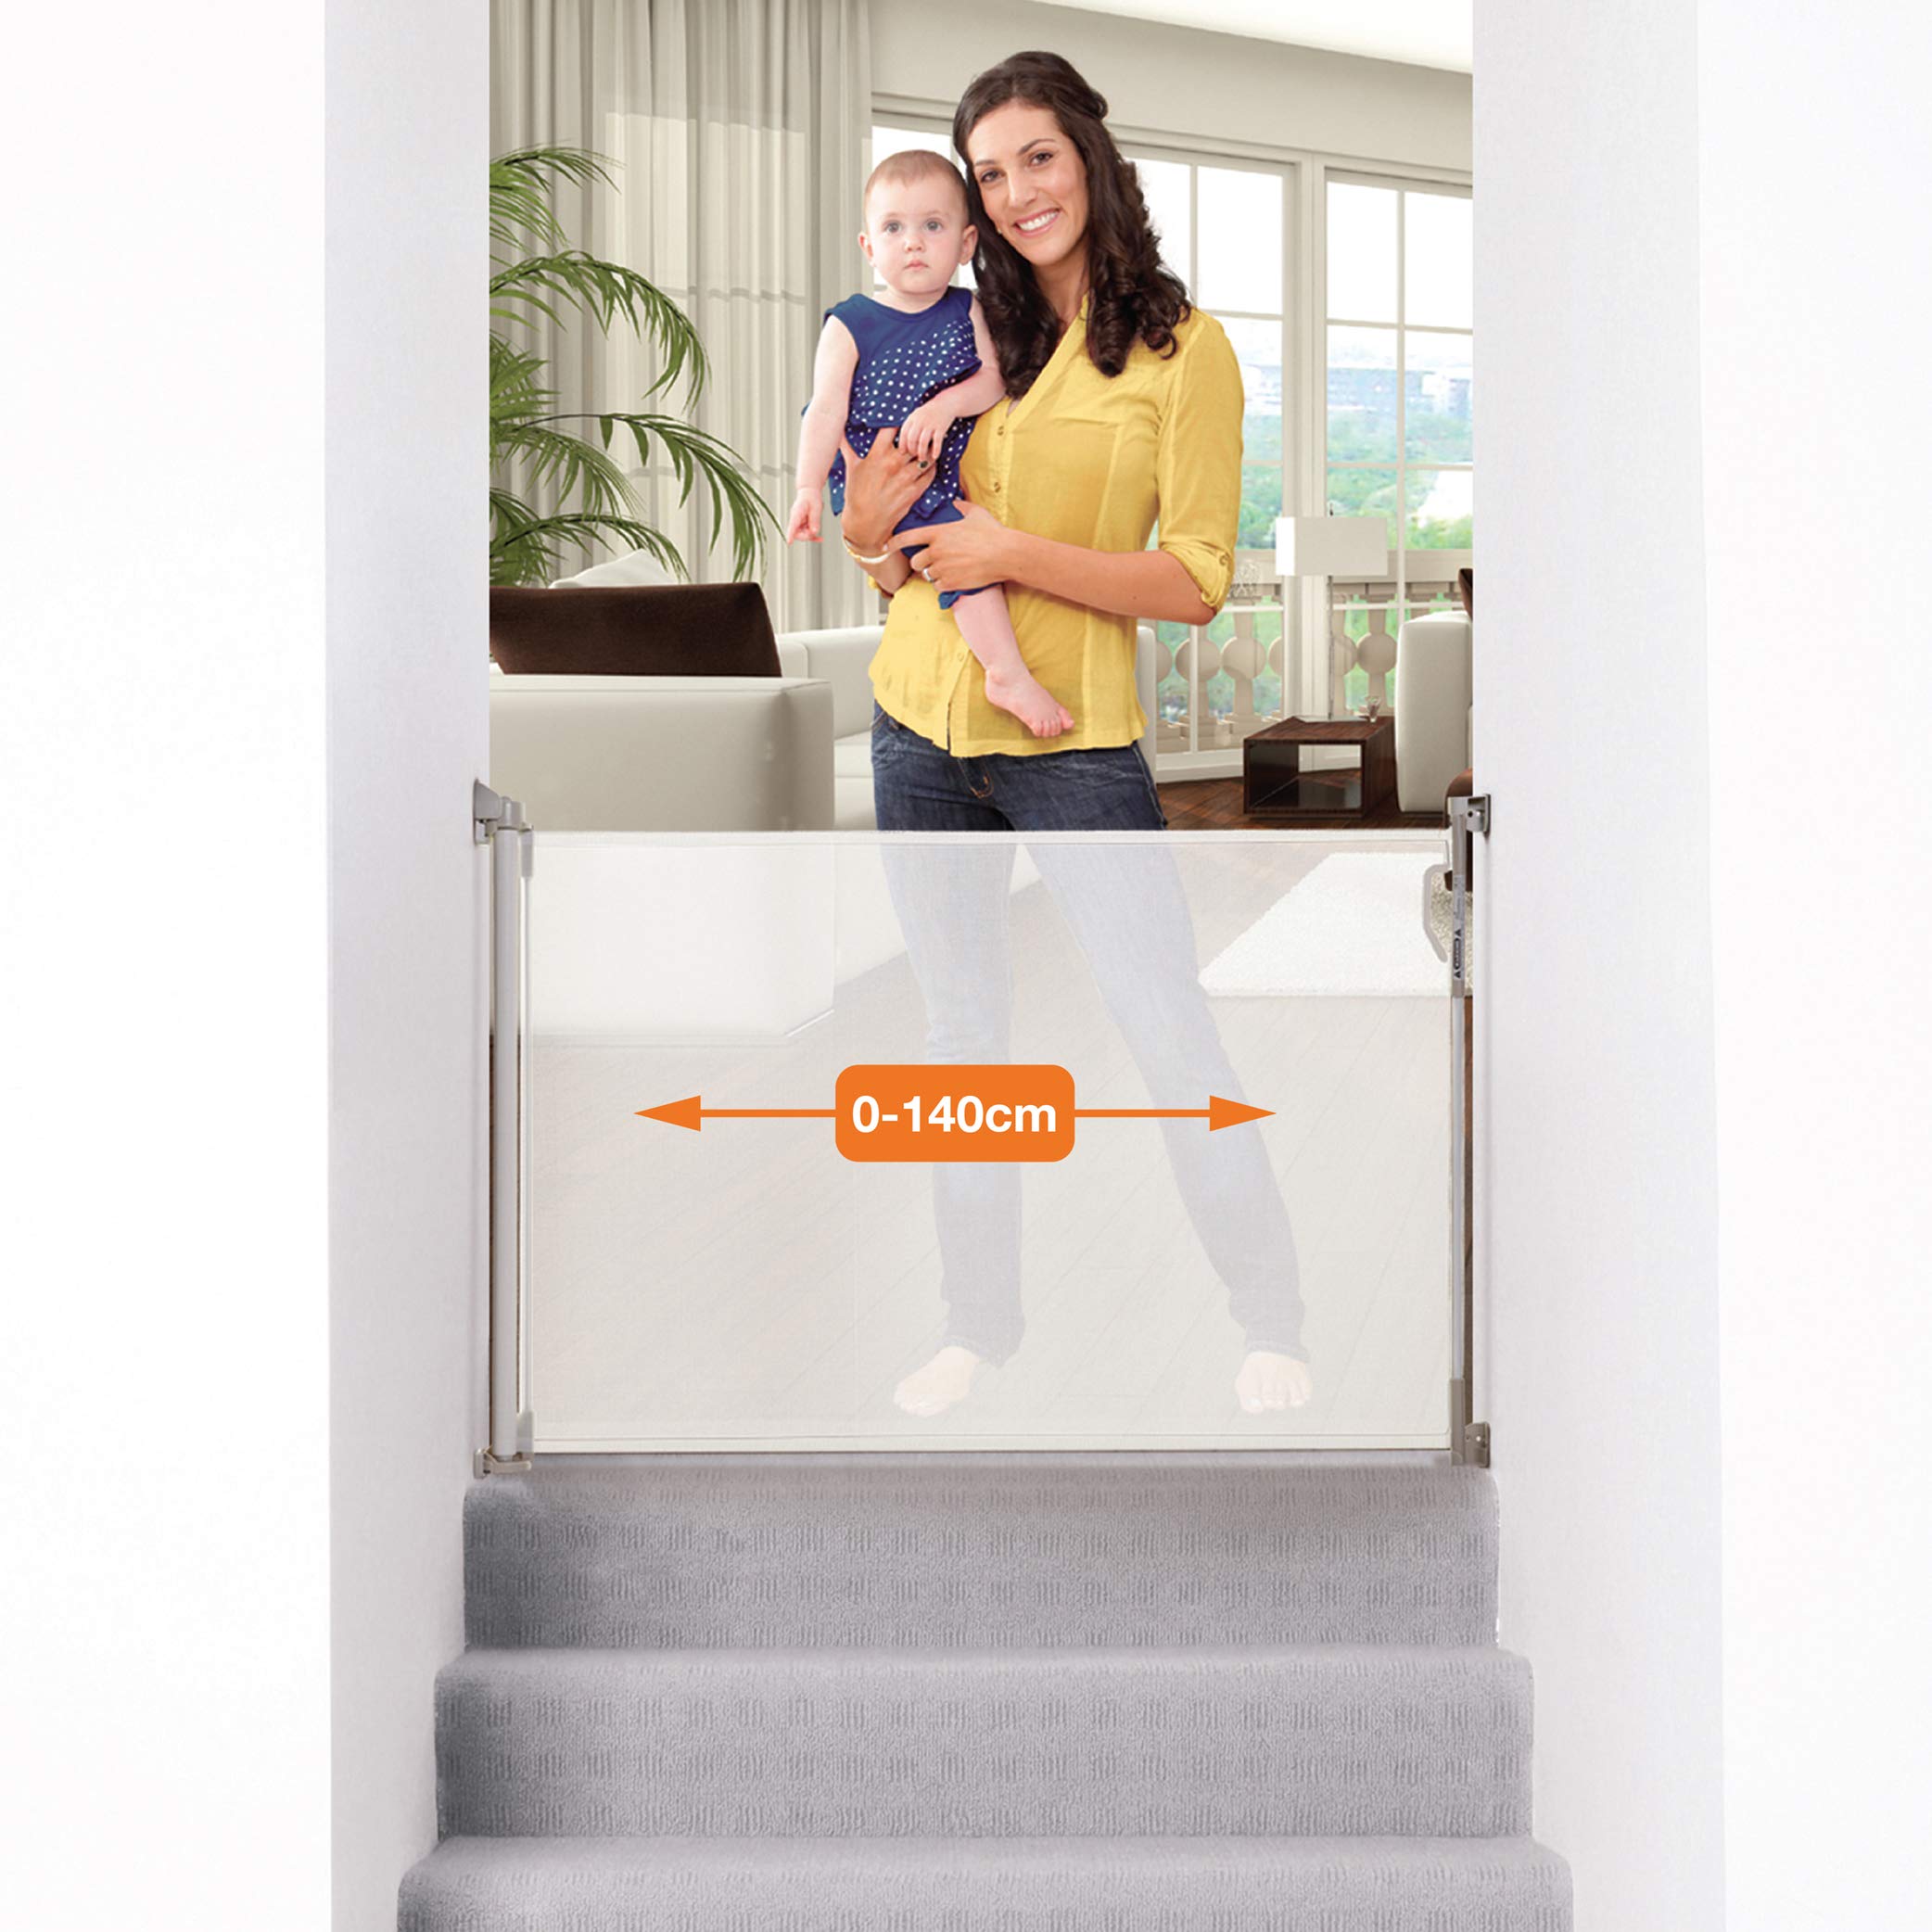 Dreambaby Retractable Baby Safety Gate - Extra Wide & Tall Mesh Gate - Fits up to 140cm Wide & 93cm Tall - with 2 Sets of Mounting Brackets (included) (White)